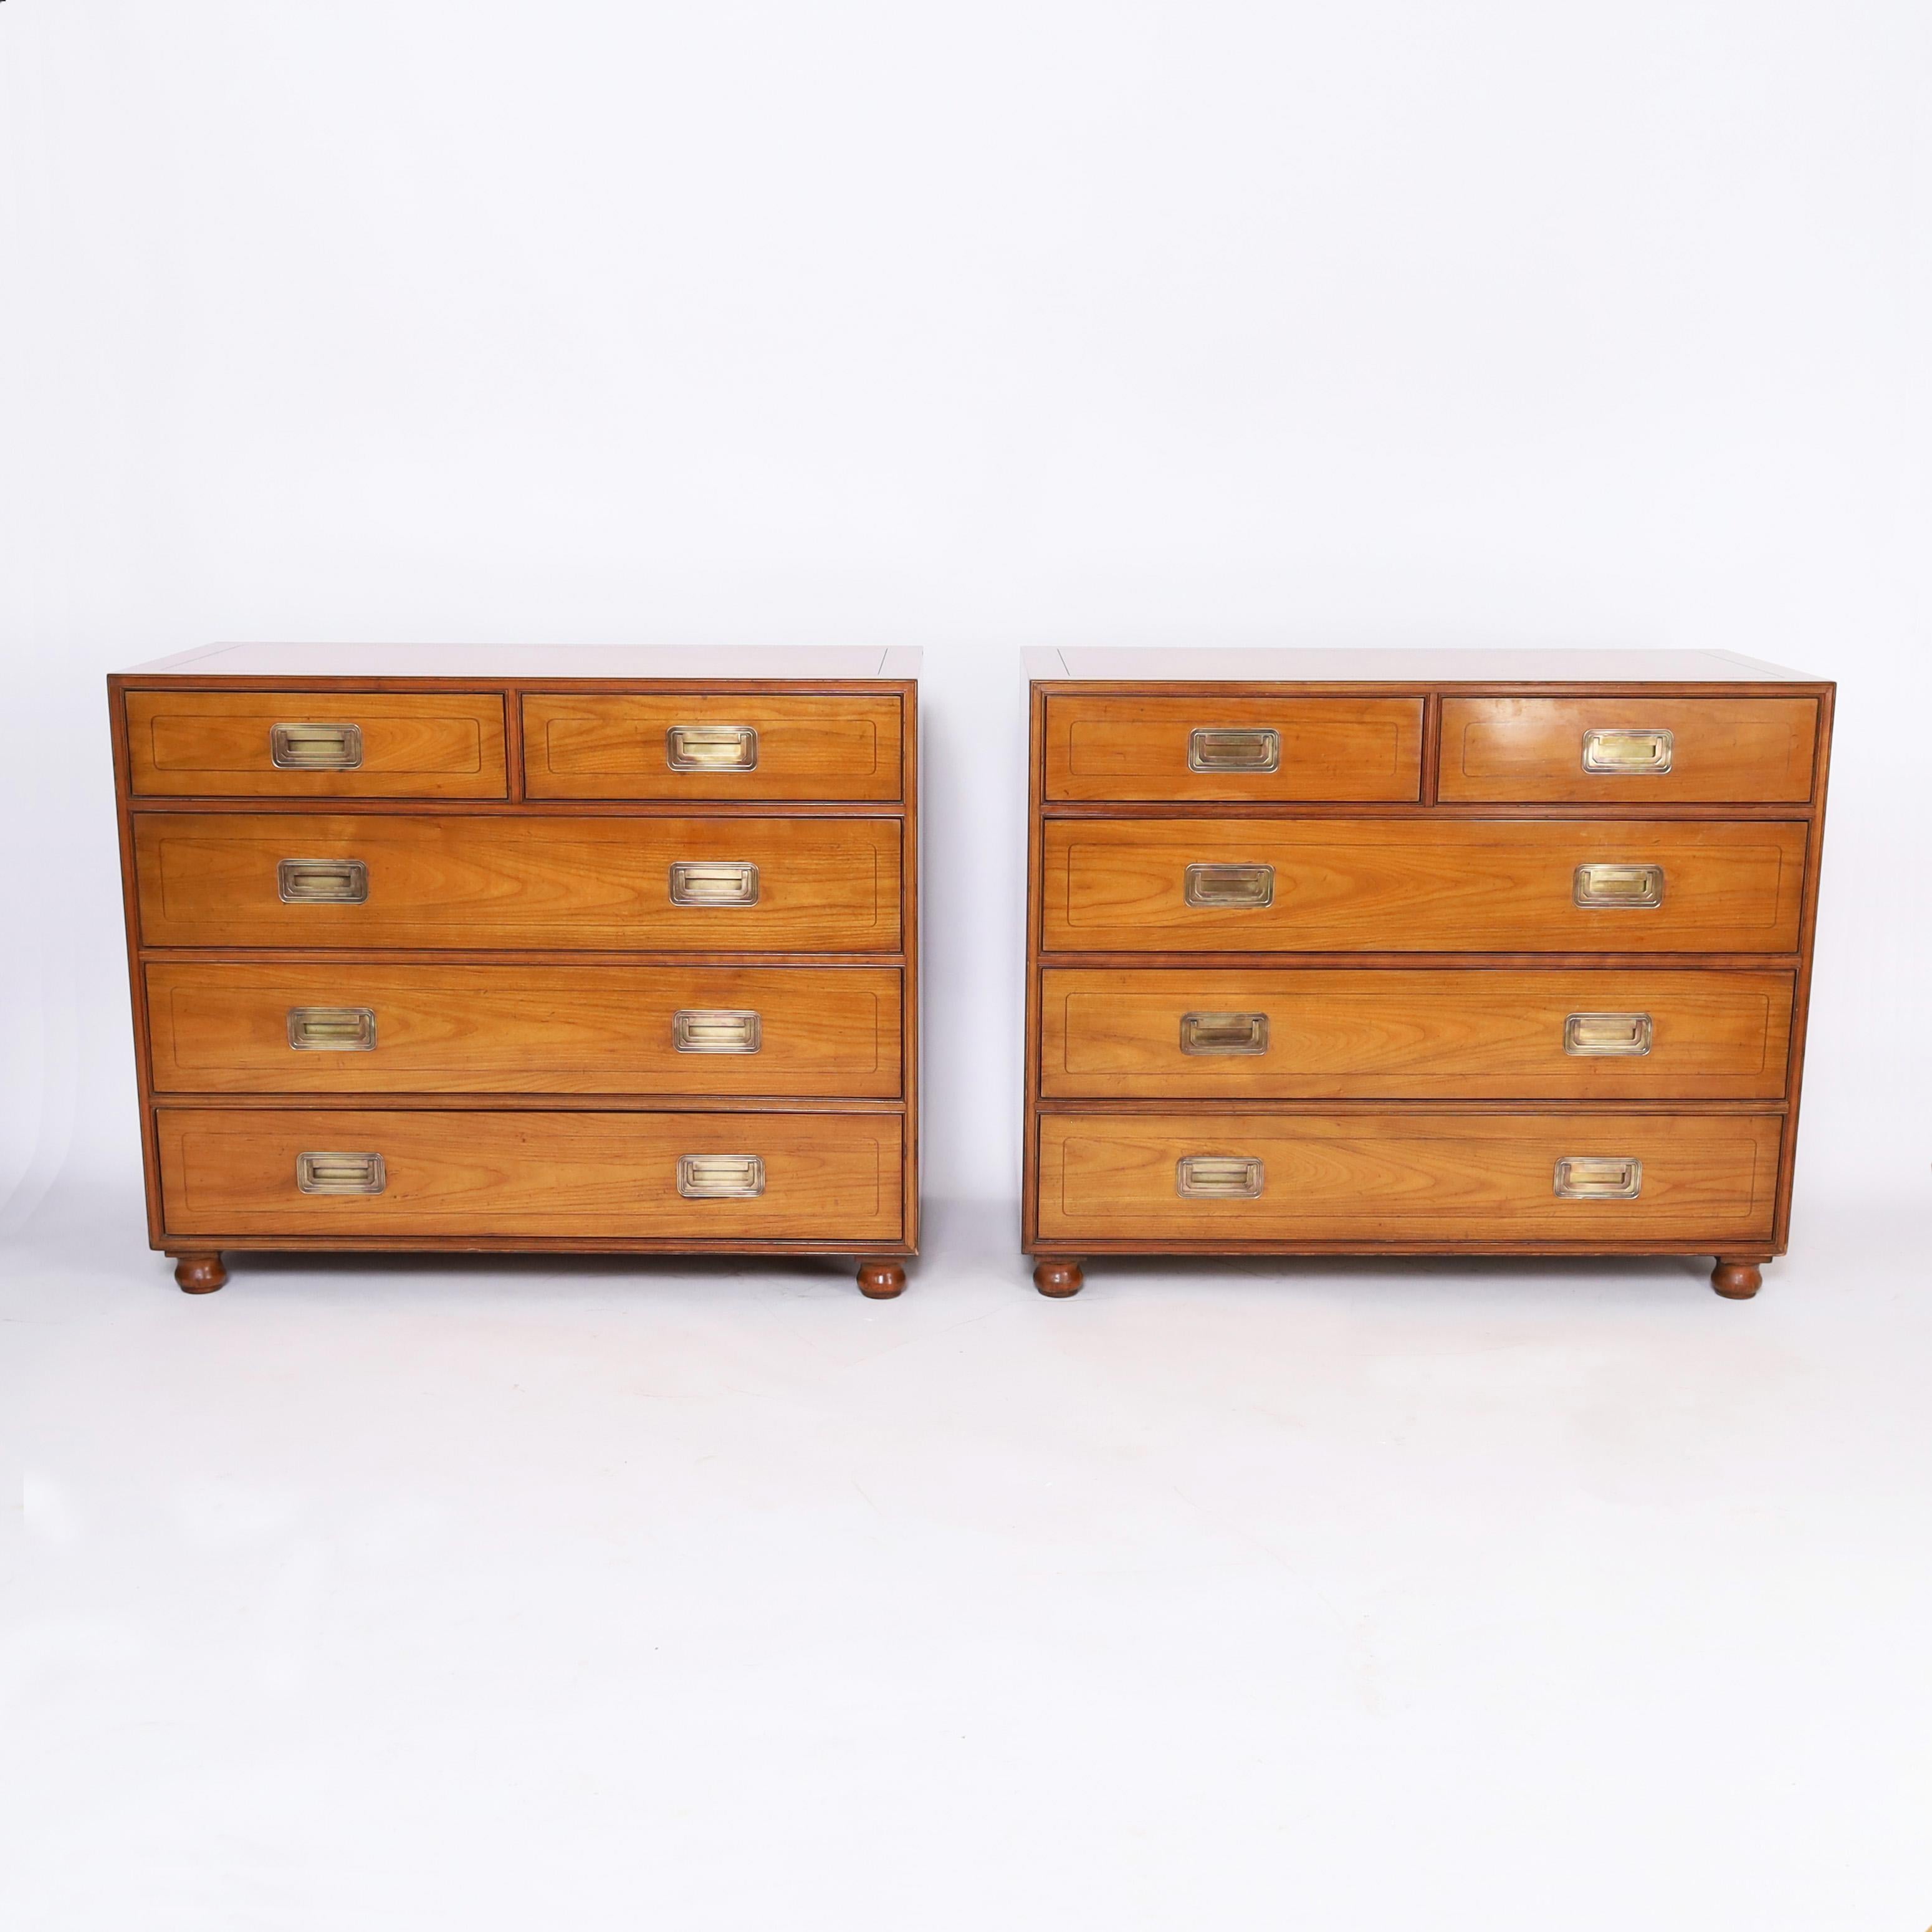 Impressive pair of chests or commodes crafted in fruitwood in a sleek modern form with hints of tradition having brass campaign style hardware and classic turned feet. Signed Baker in a drawer.